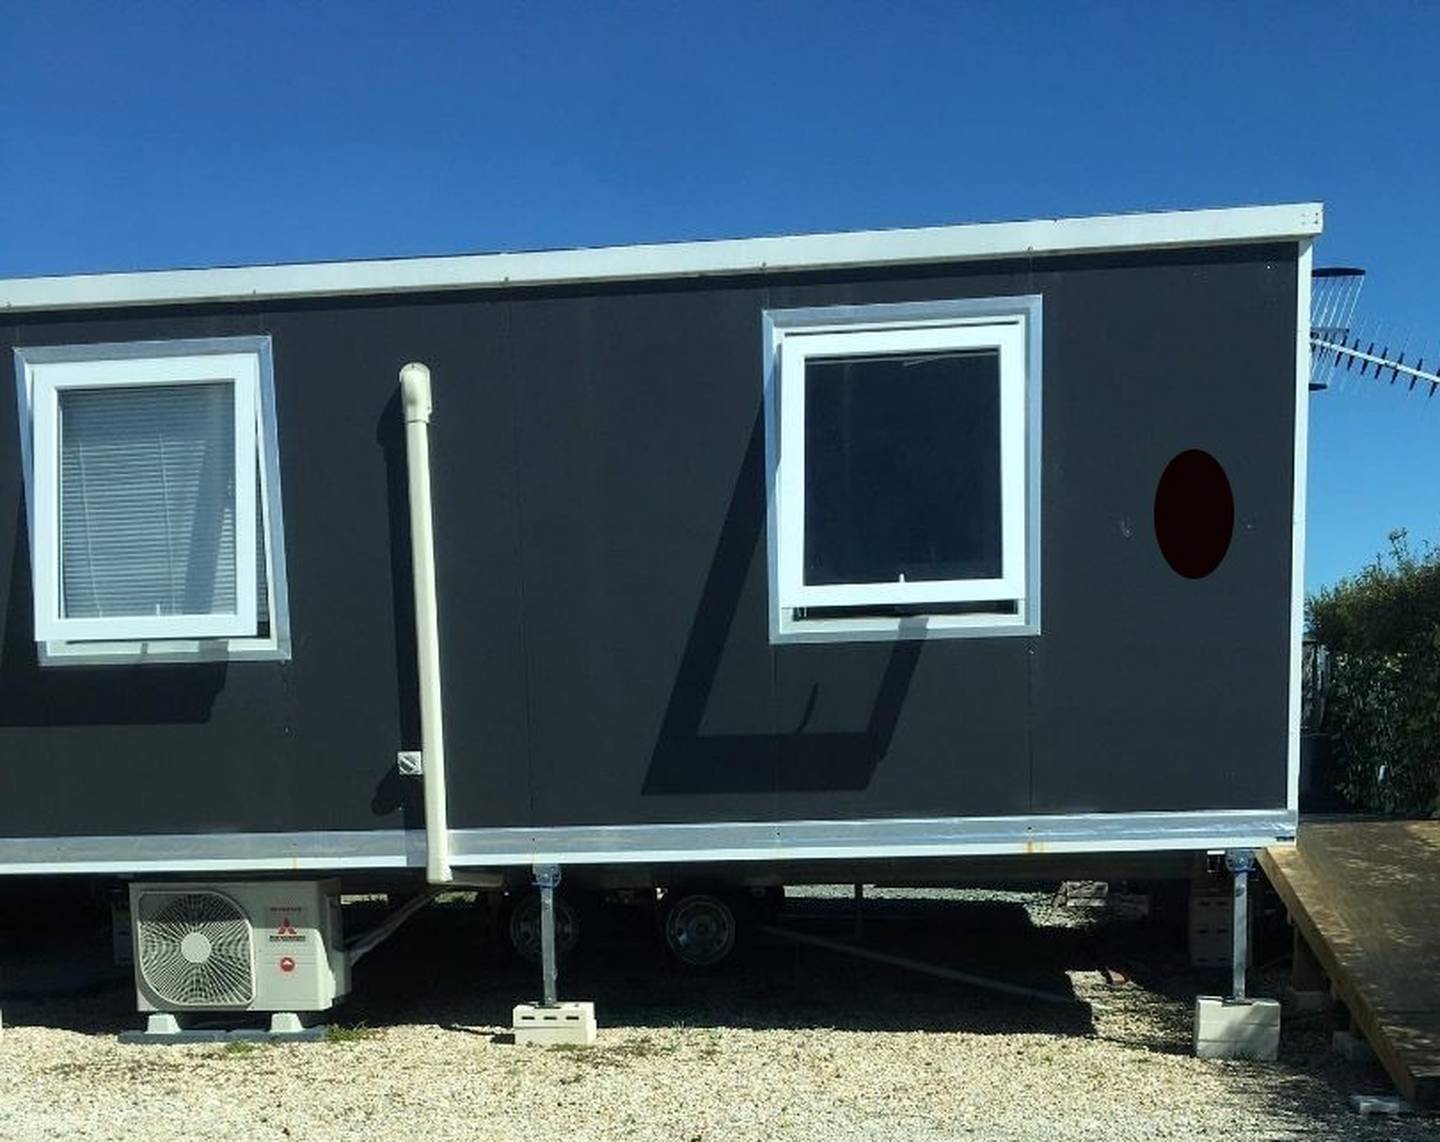 Leanne Millar paid $140,000 for this portable unit at the Queen Street Holiday Park. She was evicted with four hours' notice in August. Photo / Leanne Millar